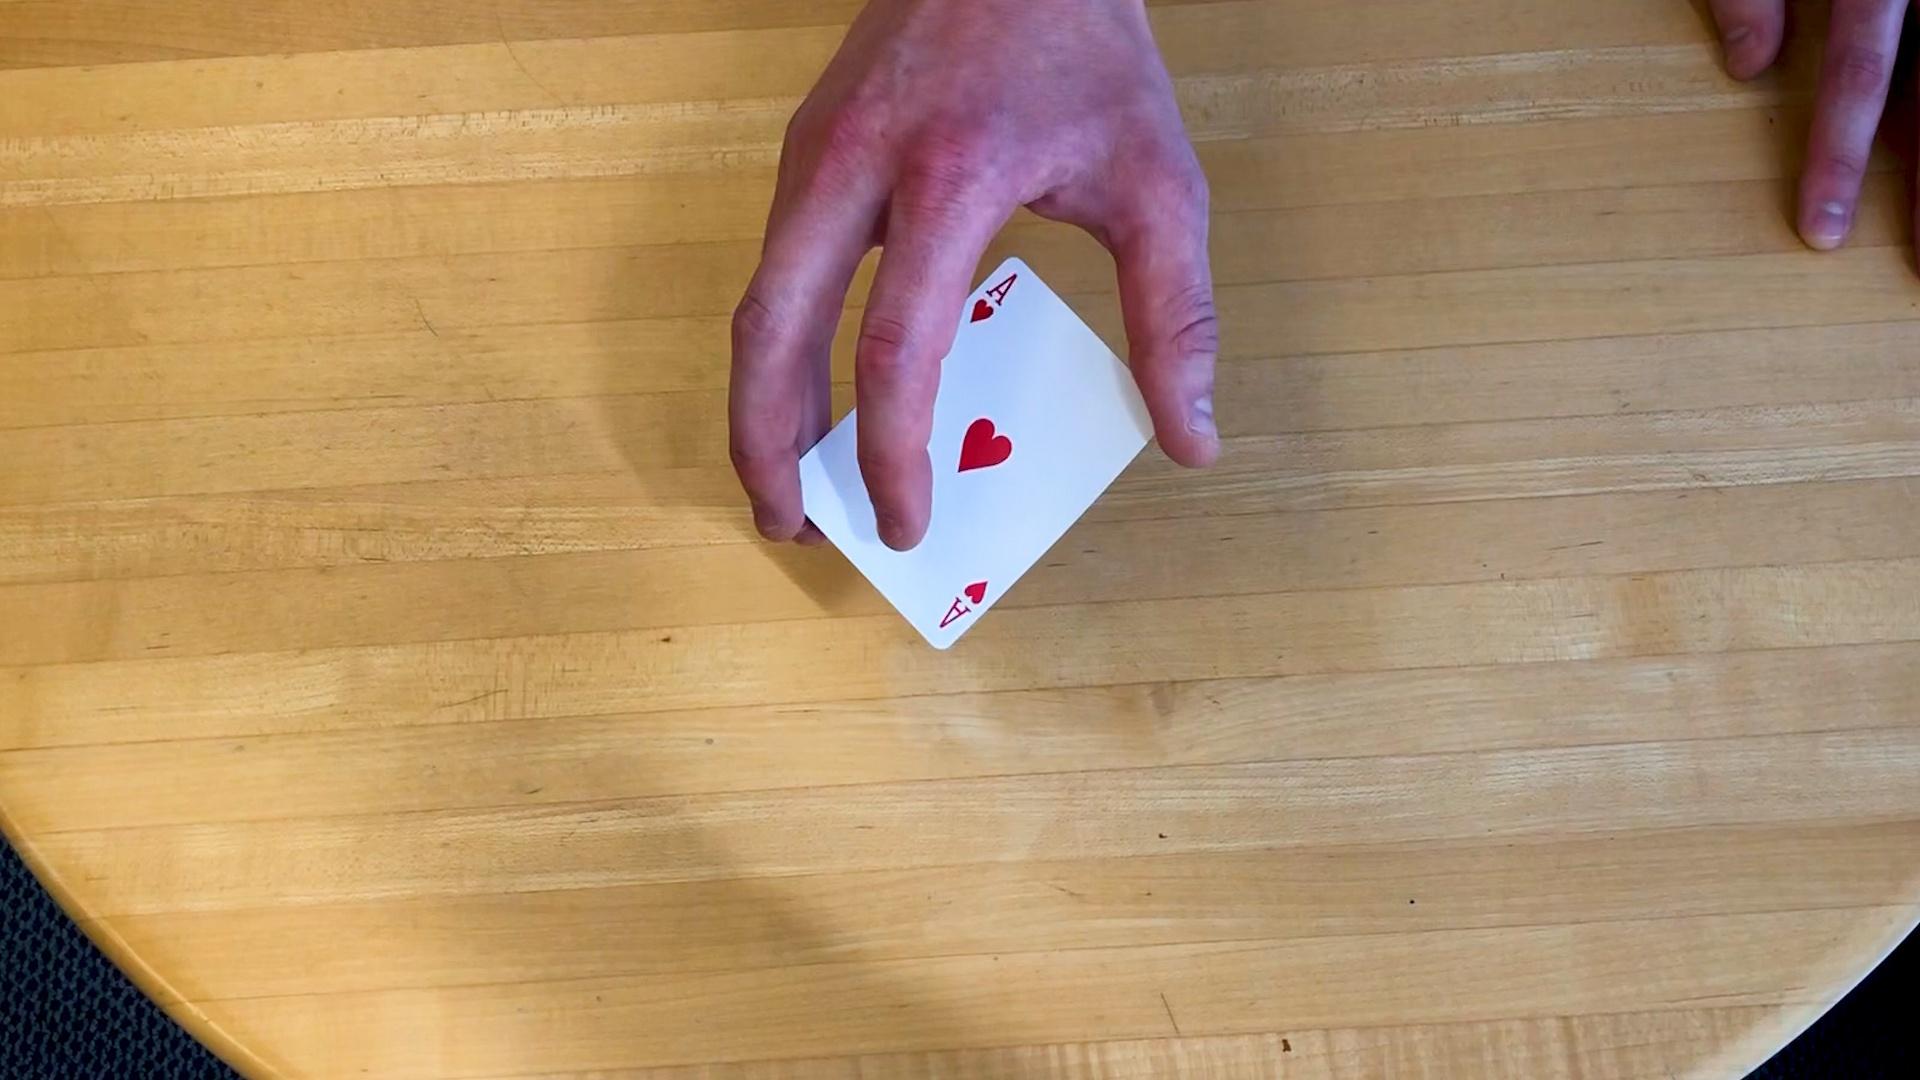 The Science Behind This Slight of Hand